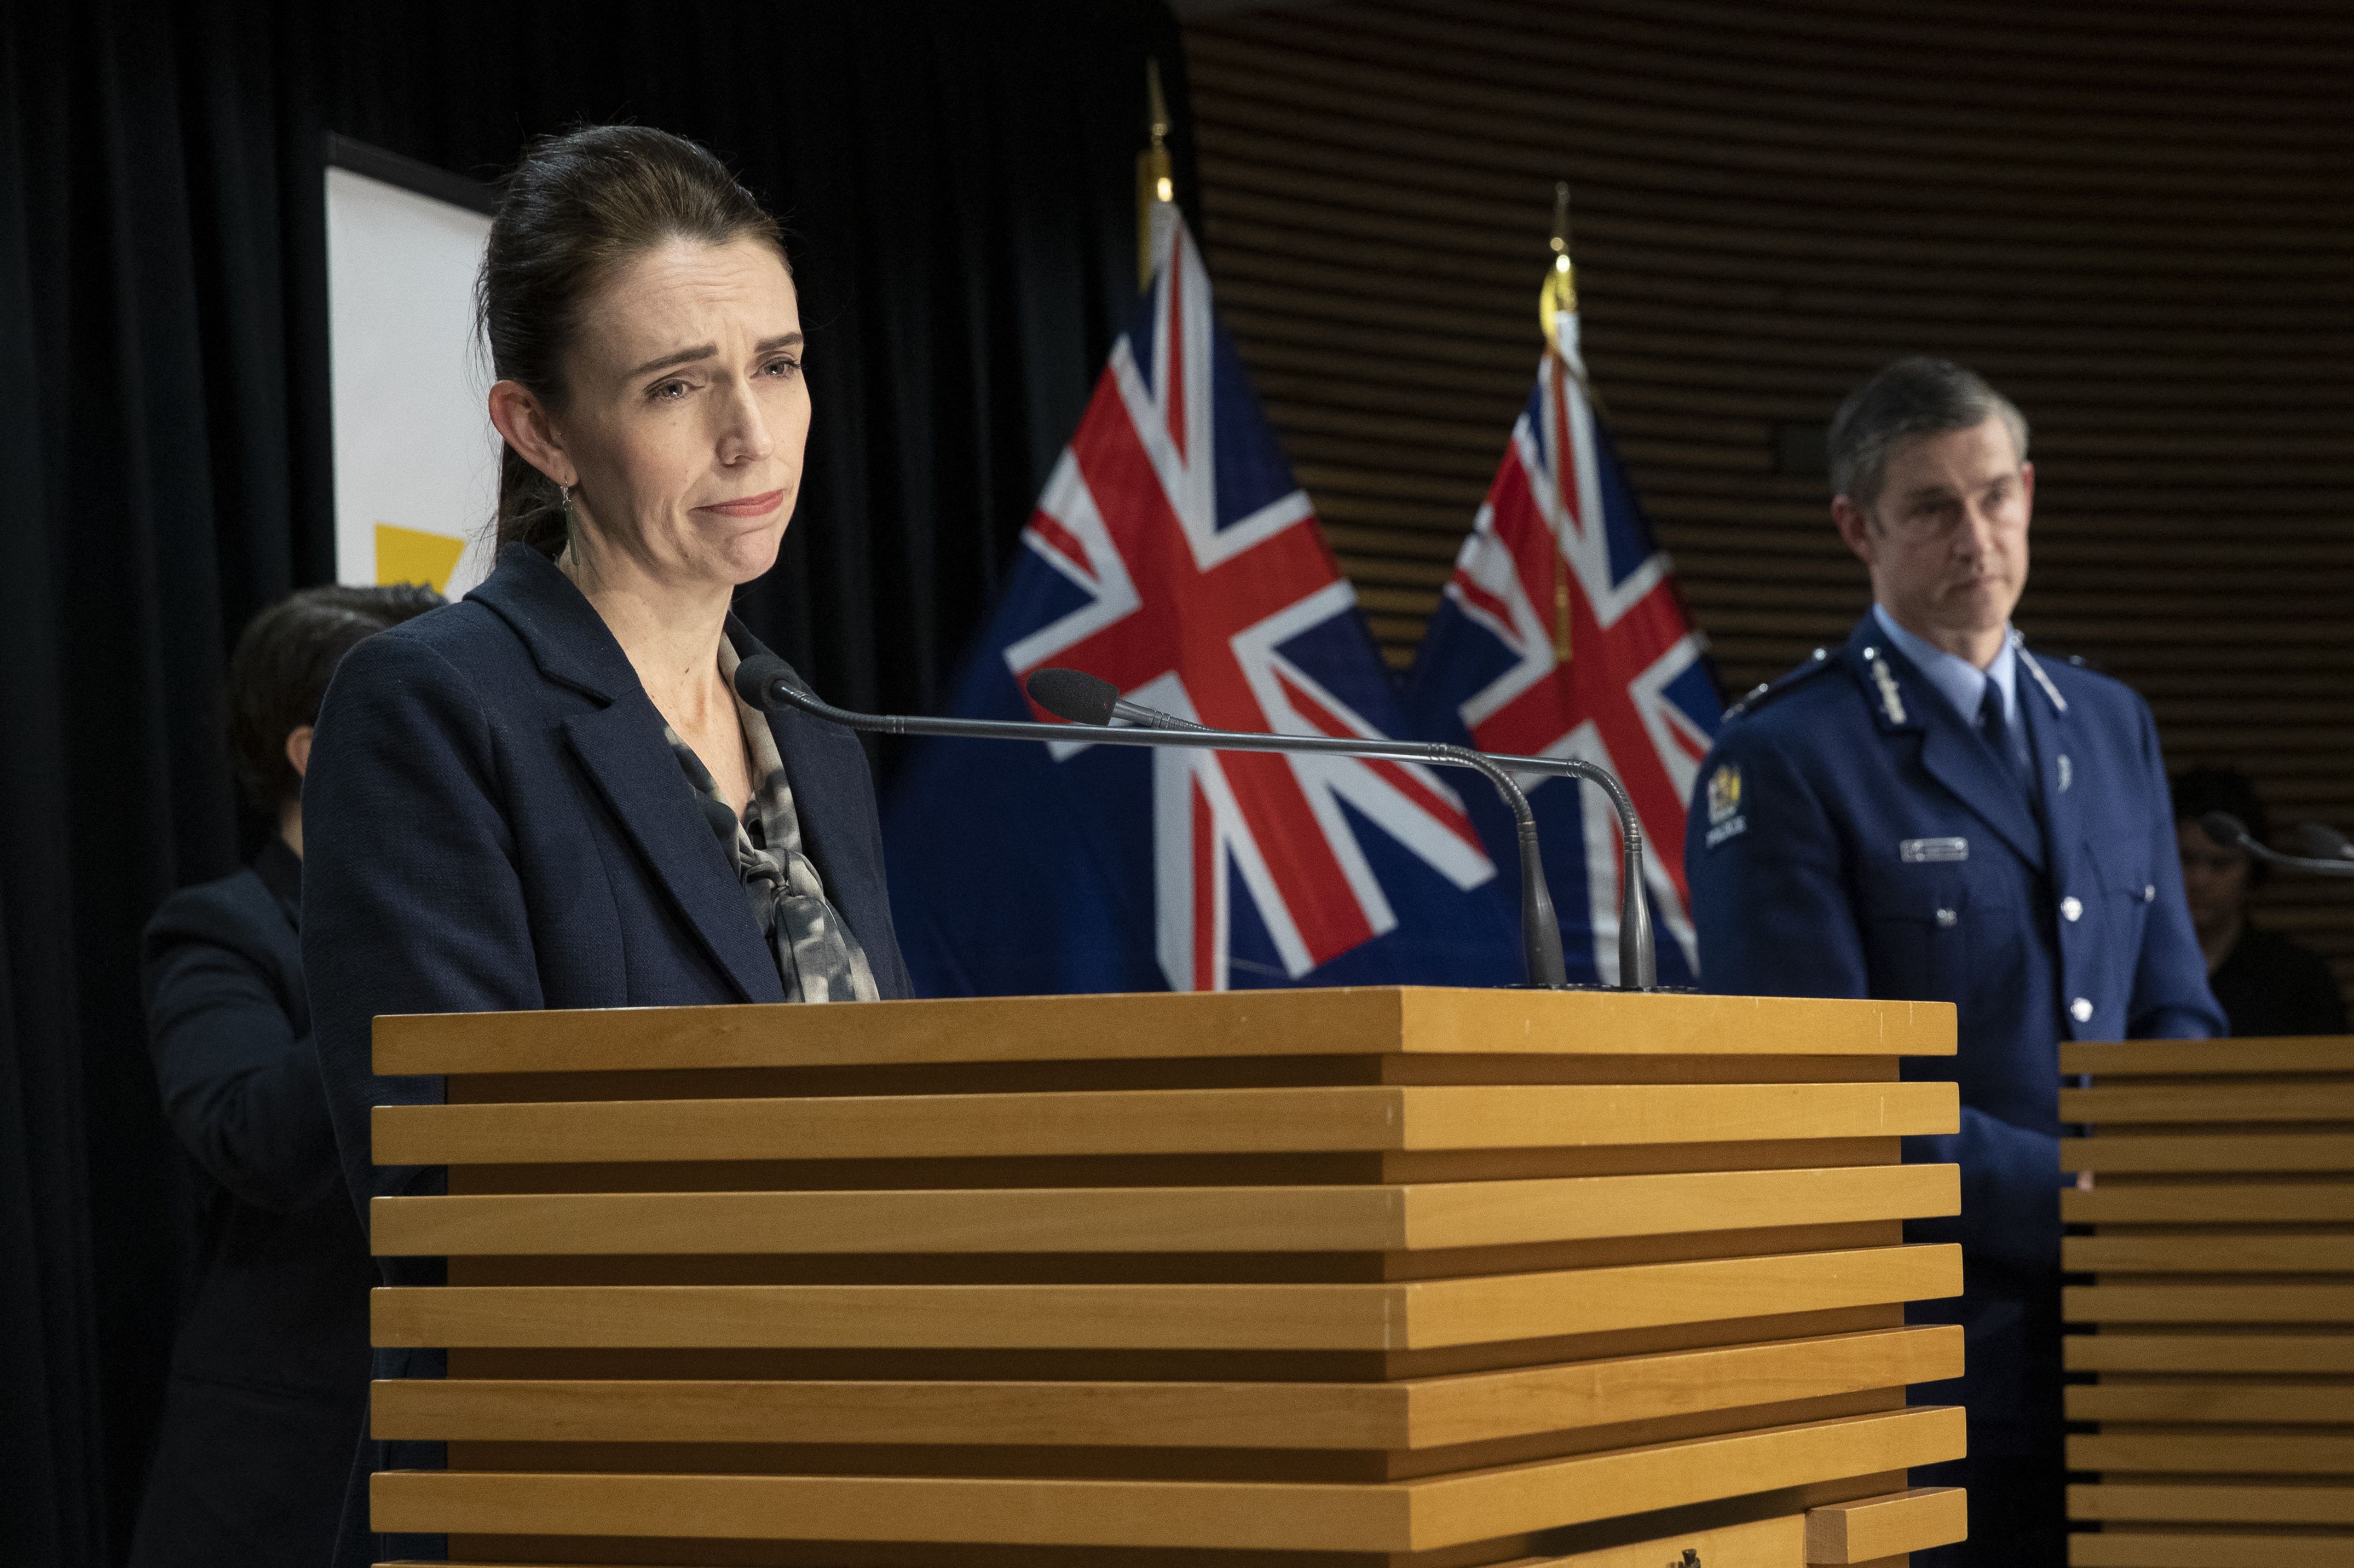 Prime Minister Jacinda Ardern said she knows many people associate the border controls with heartache but they have undeniably saved lives.